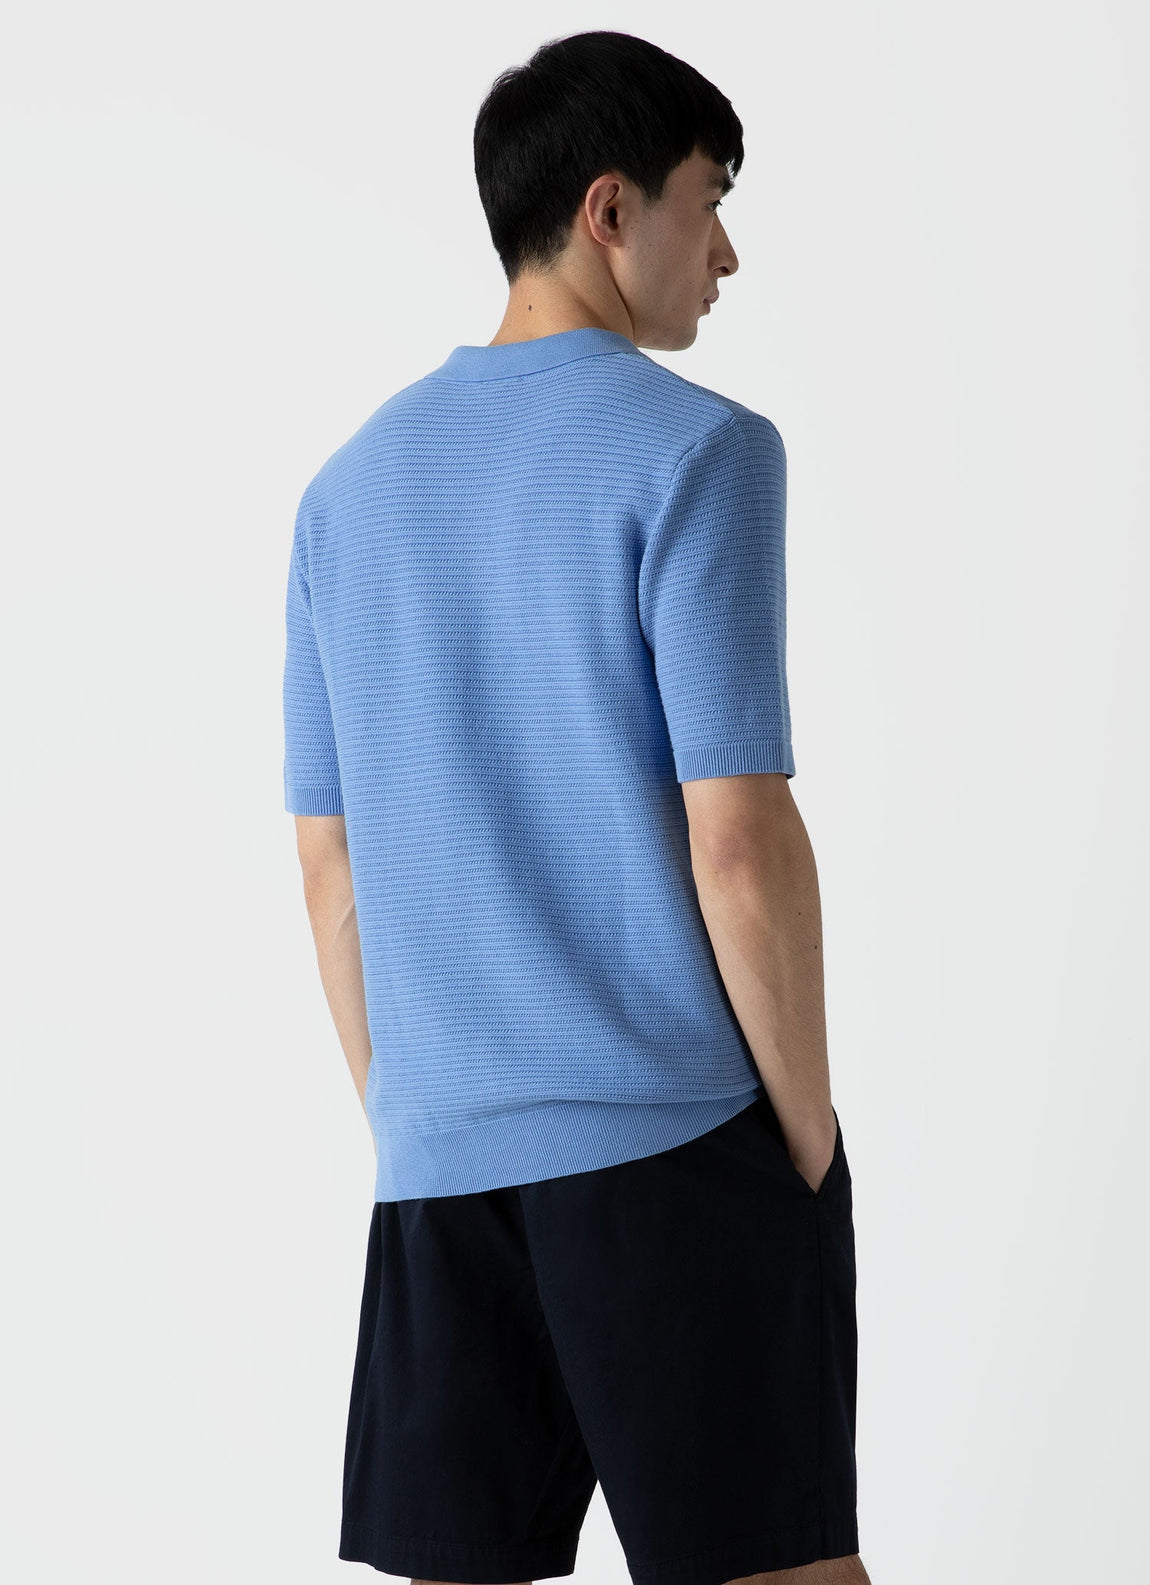 Men's Open Textured Polo Shirt in Cool Blue